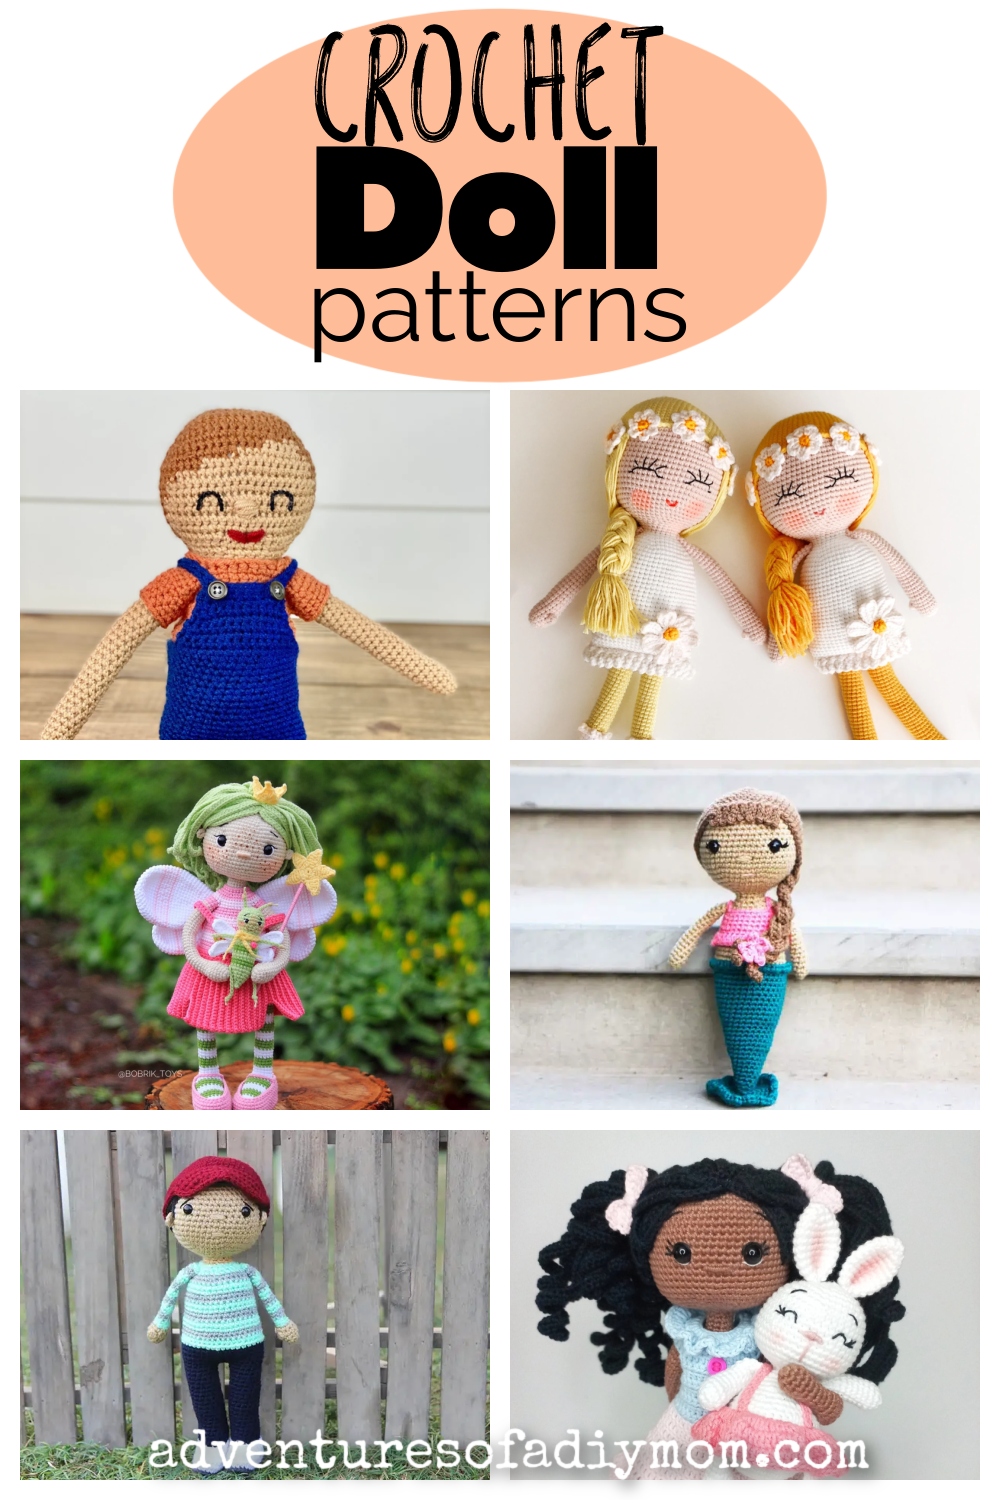 How to Make a Giant Crochet Doll- Free Crochet Pattern - A Crafty Concept